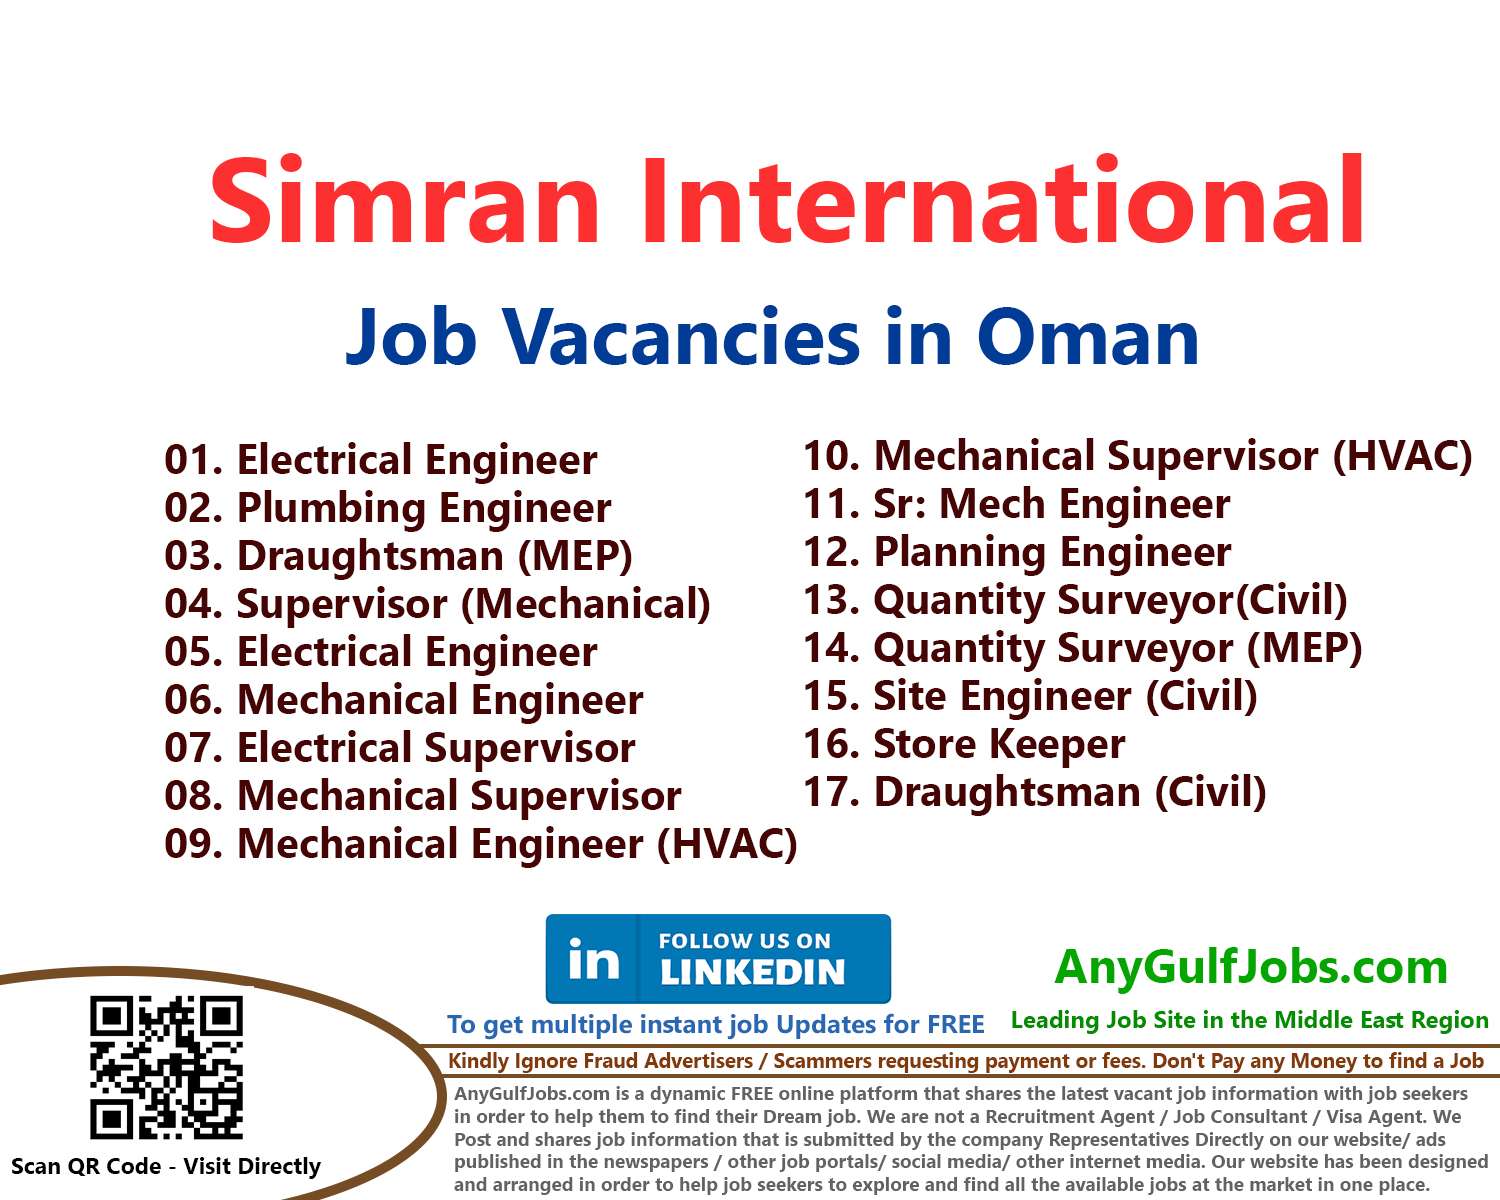 Simran International Job Vacancies in Oman Also We are going to describe to you the ways to get a job in Simran International in Oman.